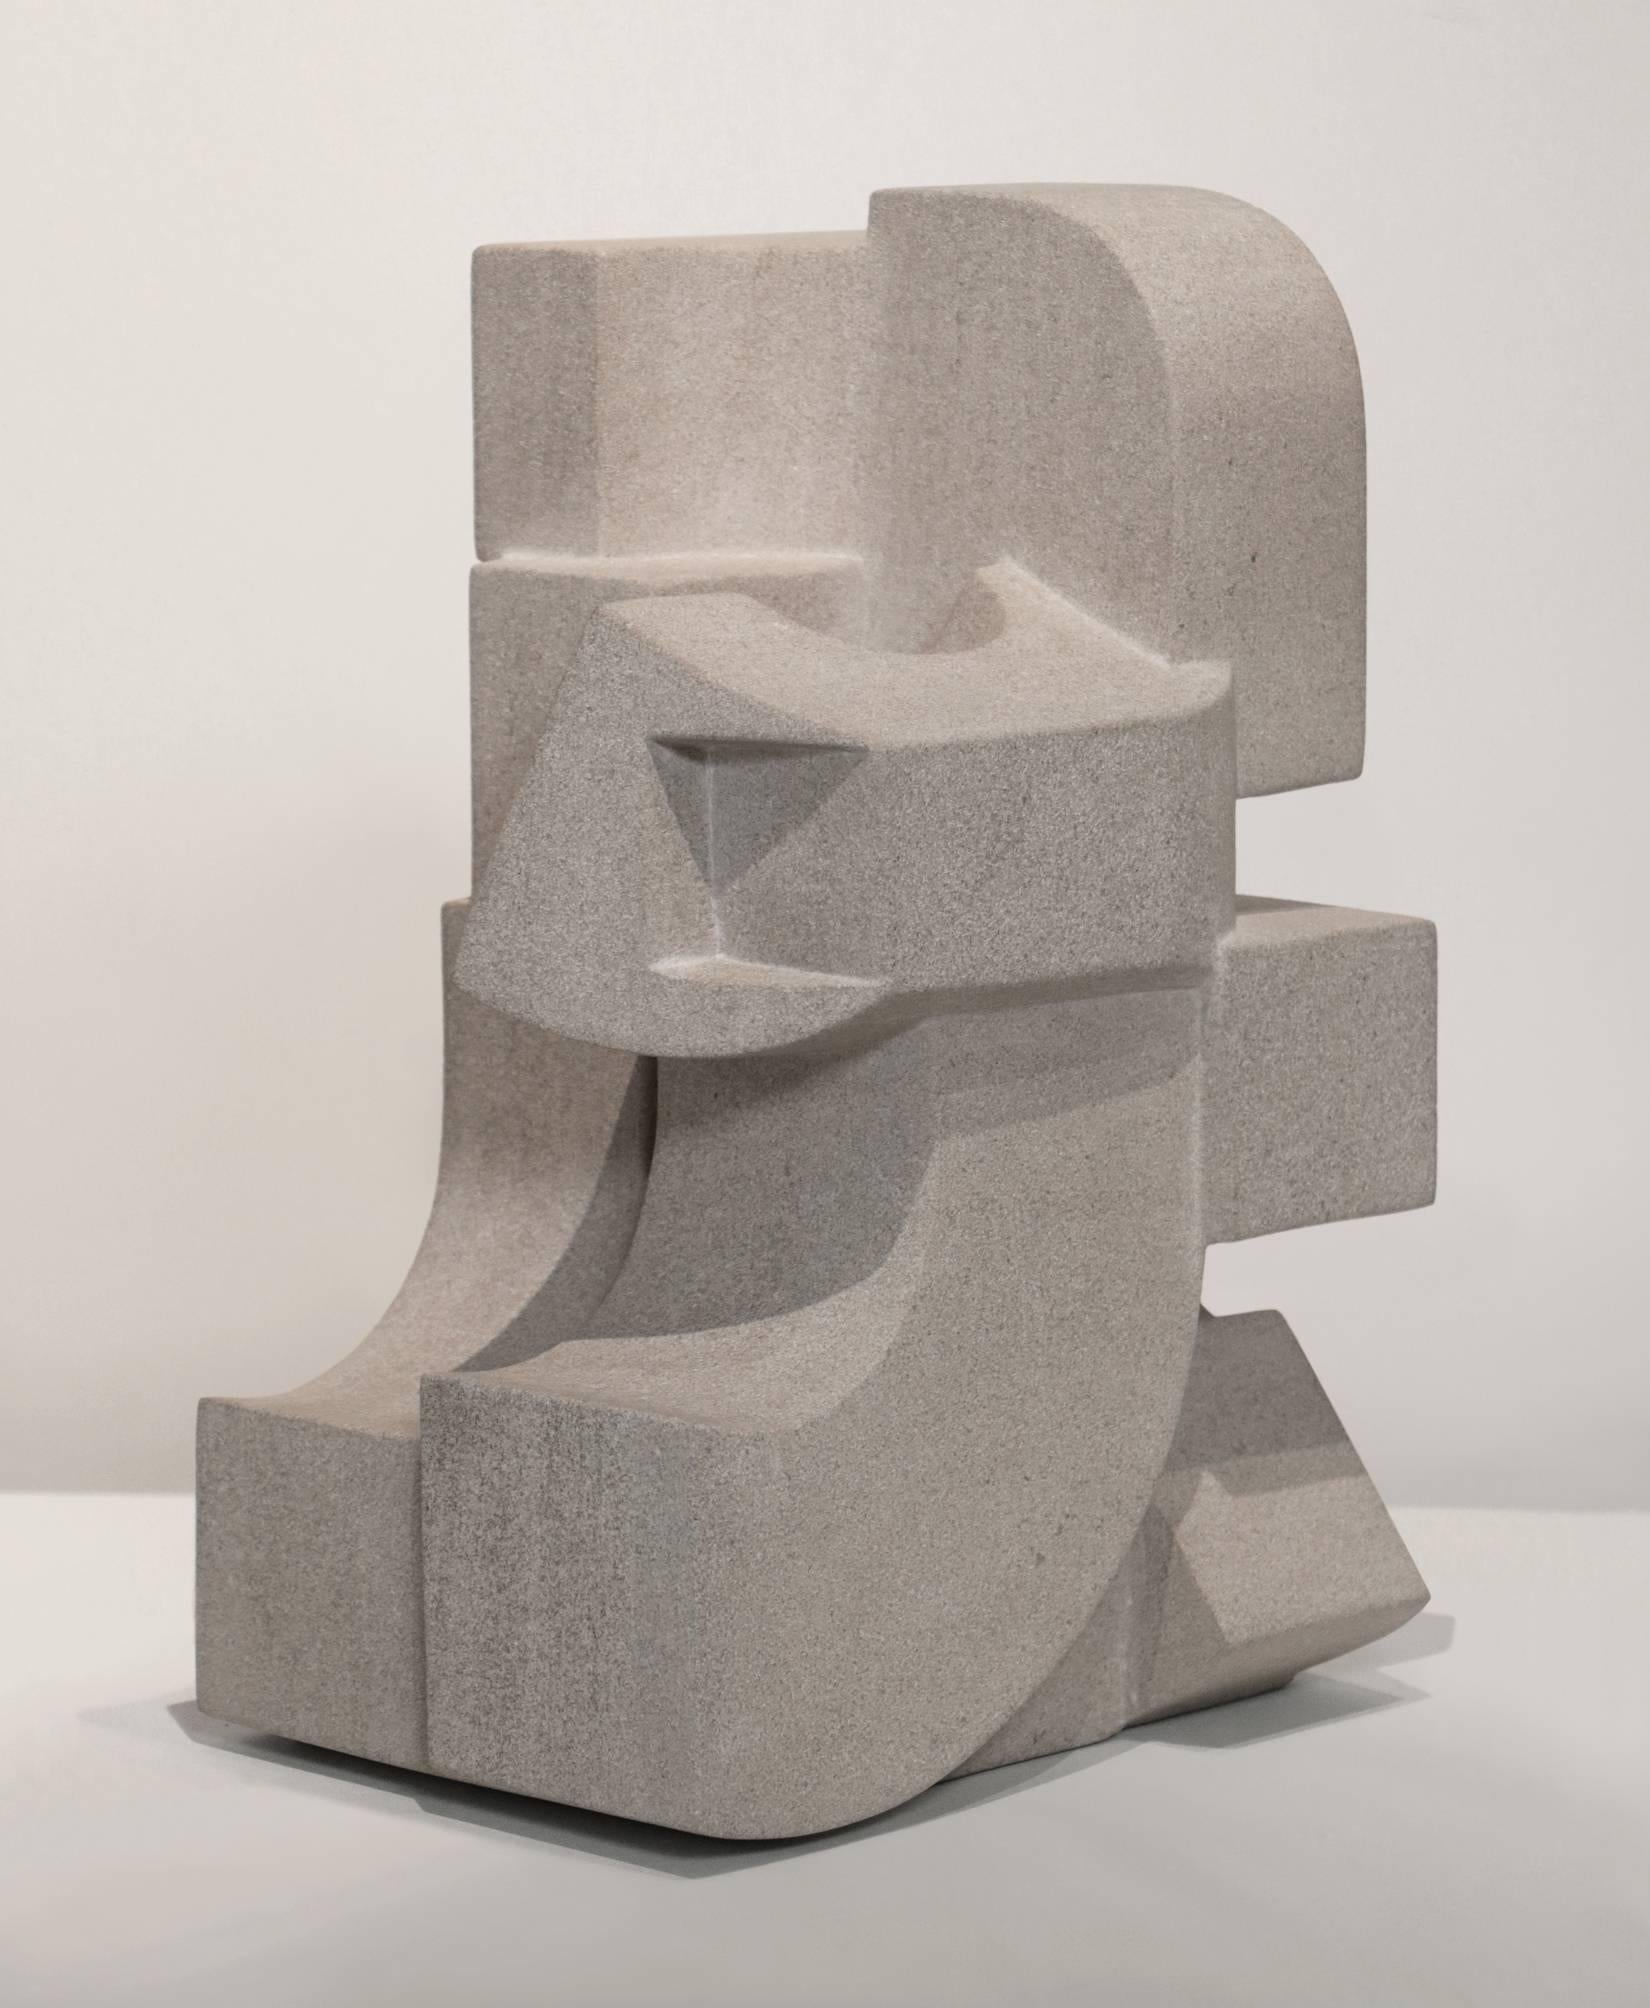 Euclidean Variation No. 8 - Gray Abstract Sculpture by Jeff Metz